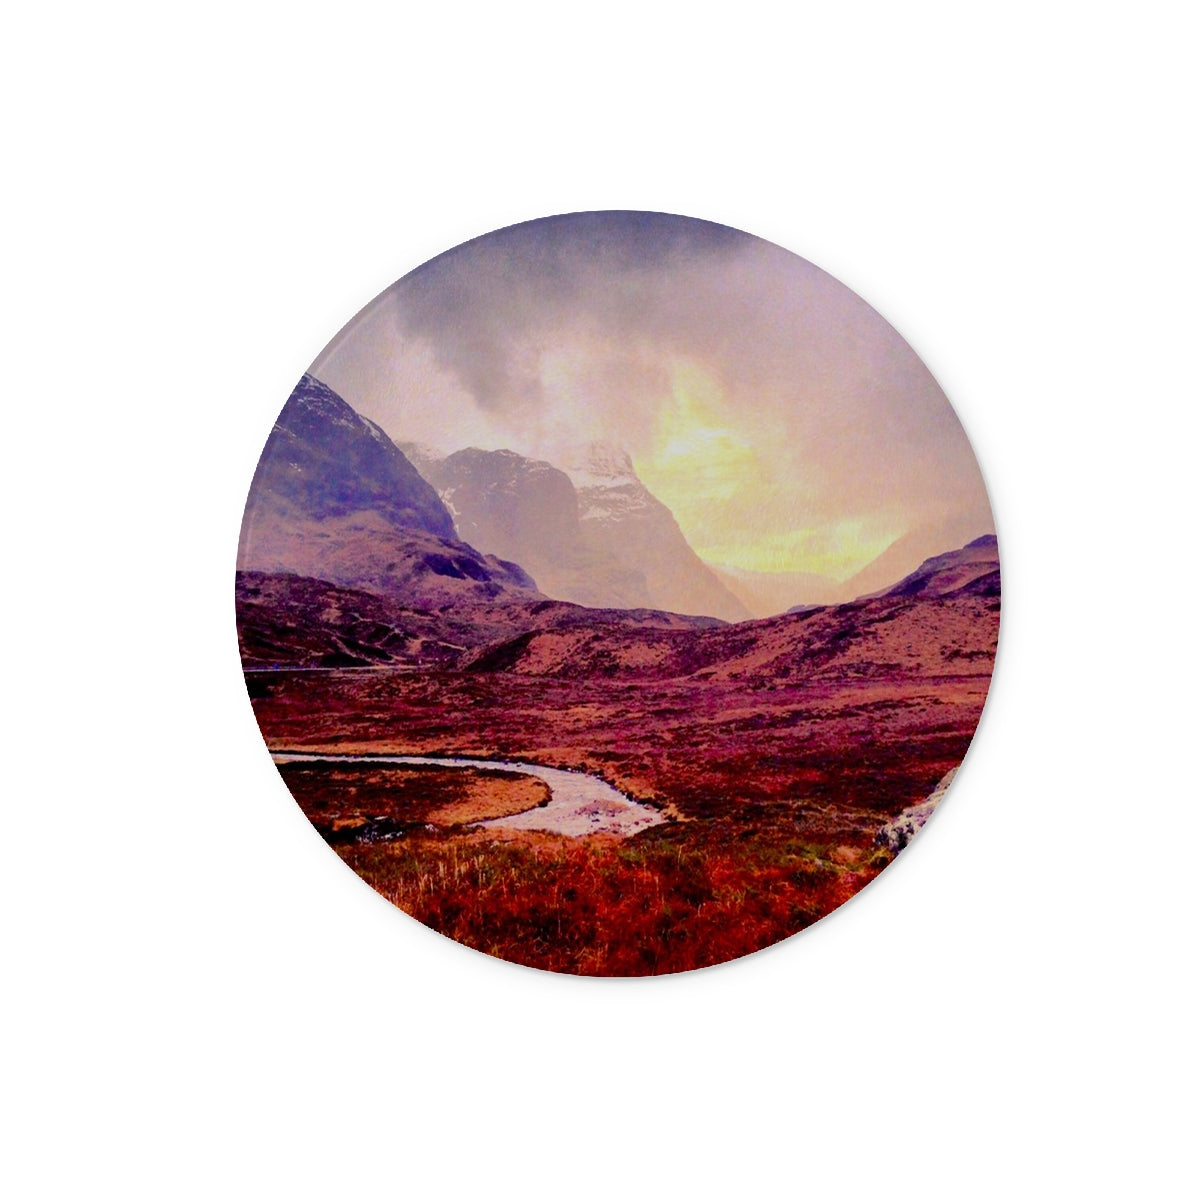 A Brooding Glencoe Art Gifts Glass Chopping Board-Glass Chopping Boards-Glencoe Art Gallery-12" Round-Paintings, Prints, Homeware, Art Gifts From Scotland By Scottish Artist Kevin Hunter